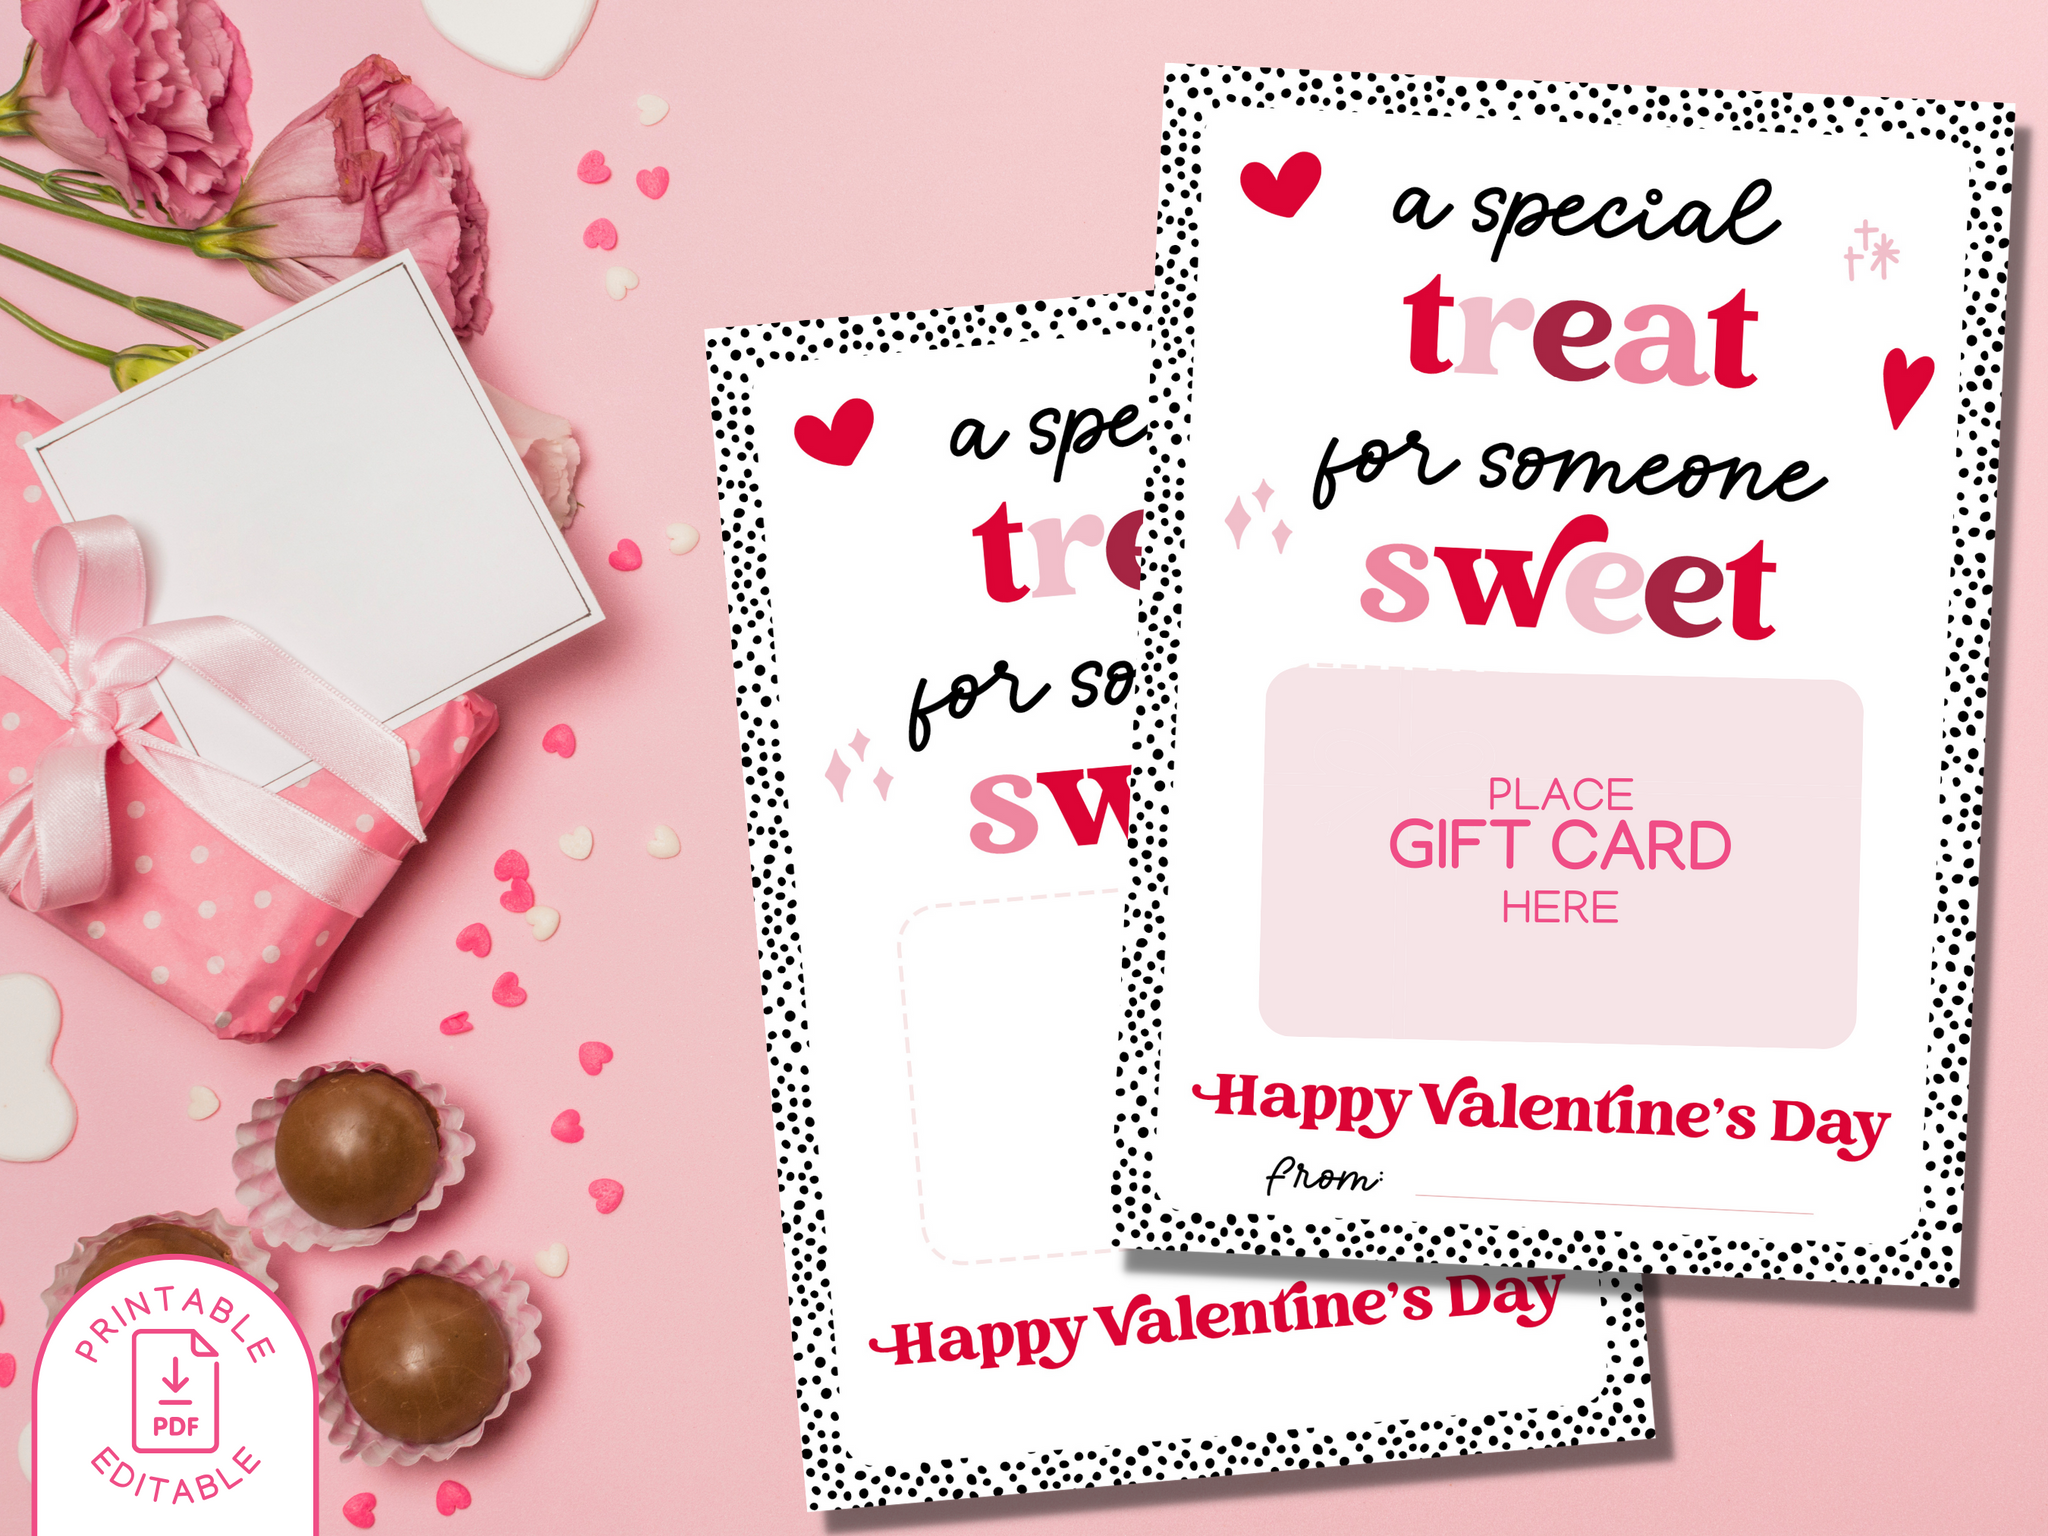 A special Treat For Someone Sweet Valentine Gift Card Holder - Dots - Editable PDF